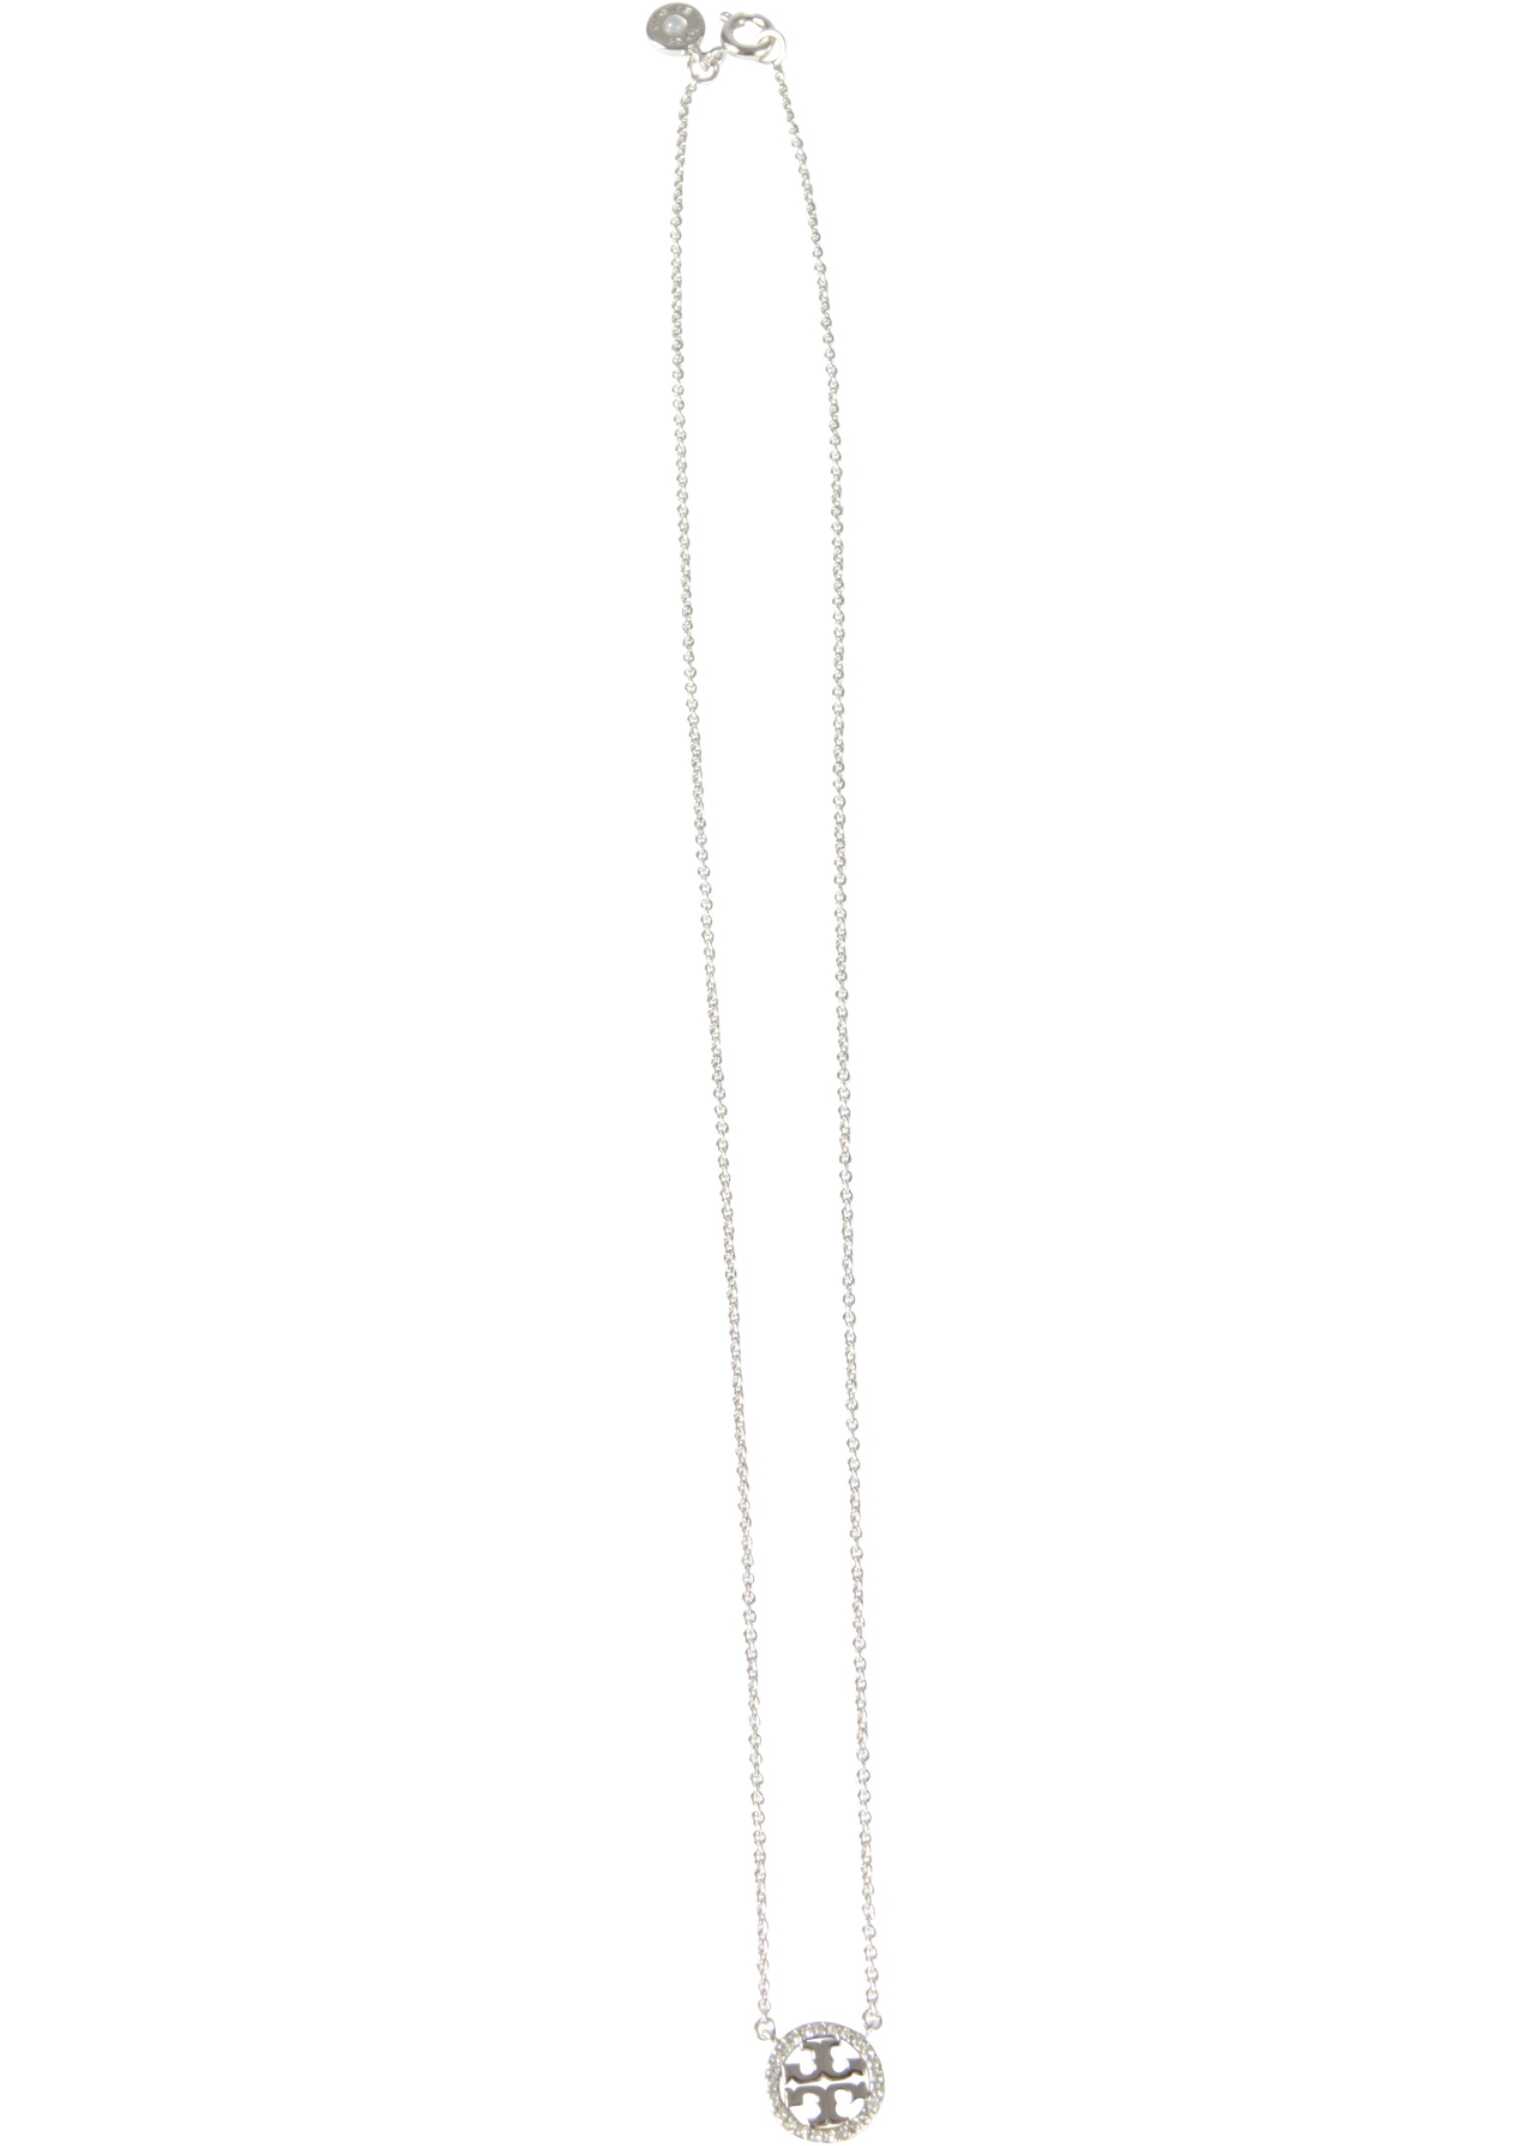 Tory Burch Necklace With Crystal Logo 53420_042 SILVER image0